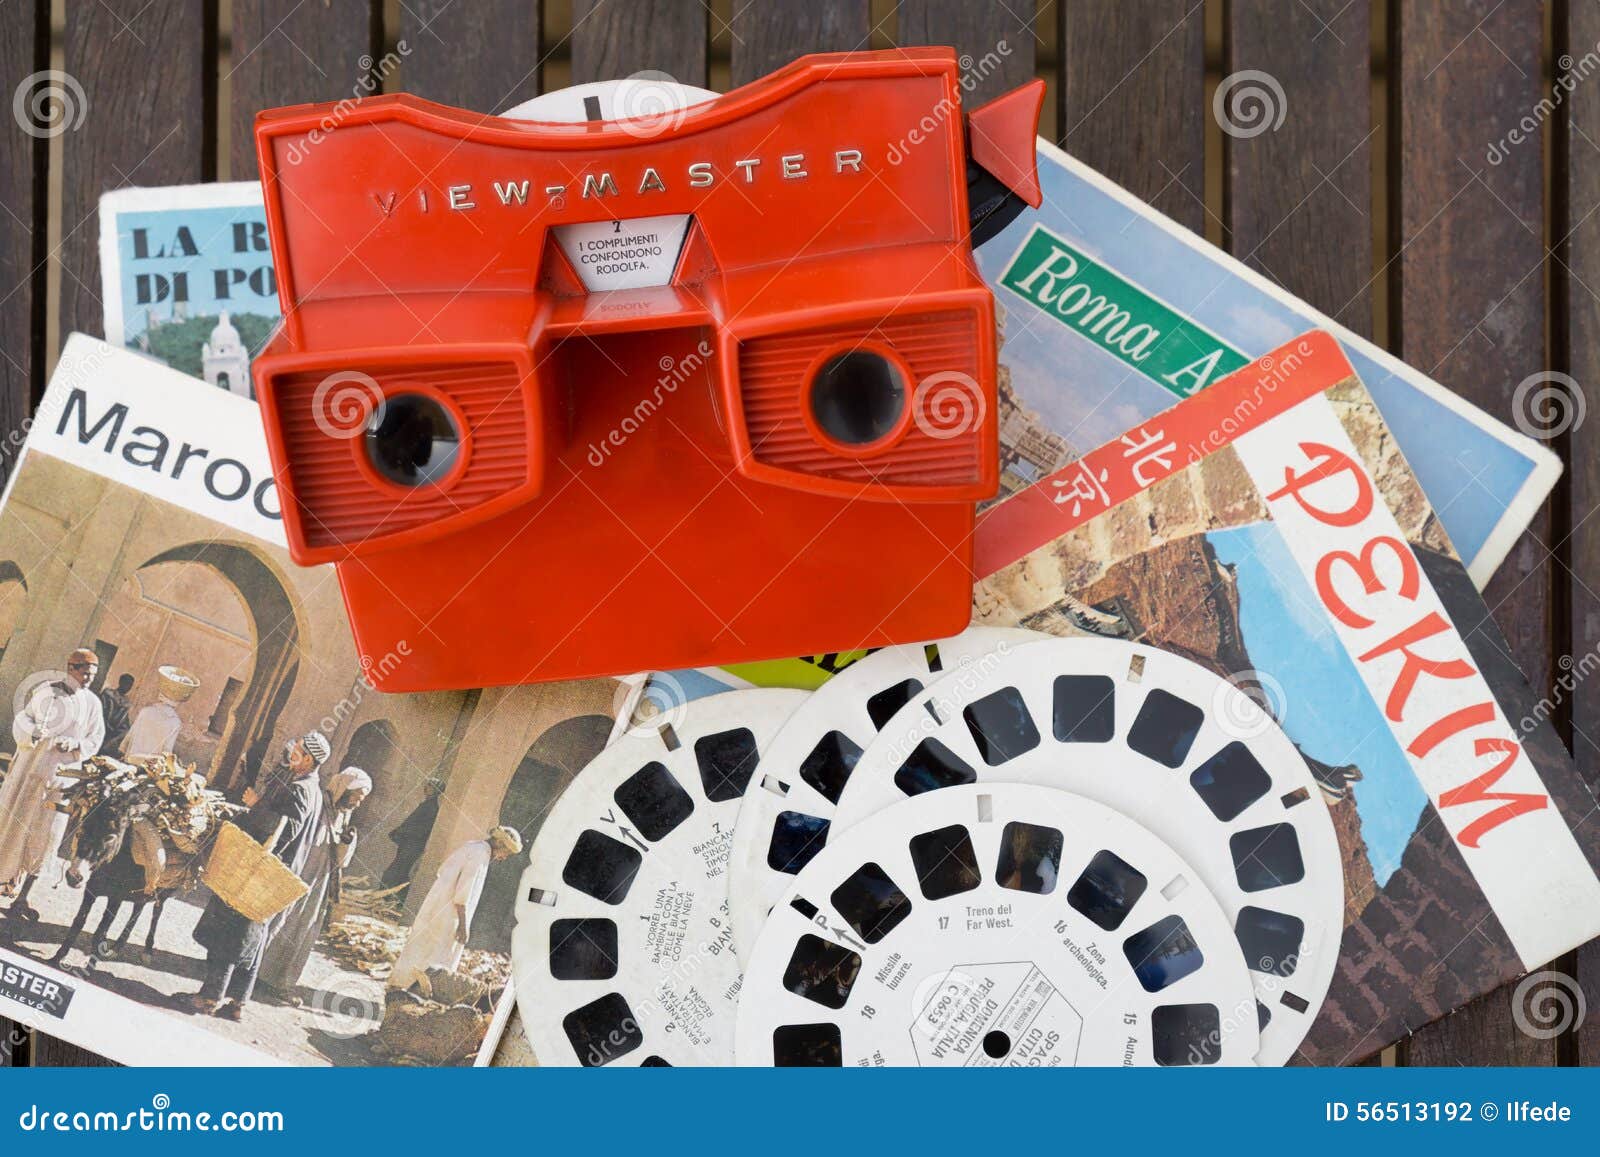 https://thumbs.dreamstime.com/z/view-master-vintage-d-viewer-toy-has-introduced-to-wonder-generations-kids-over-years-56513192.jpg